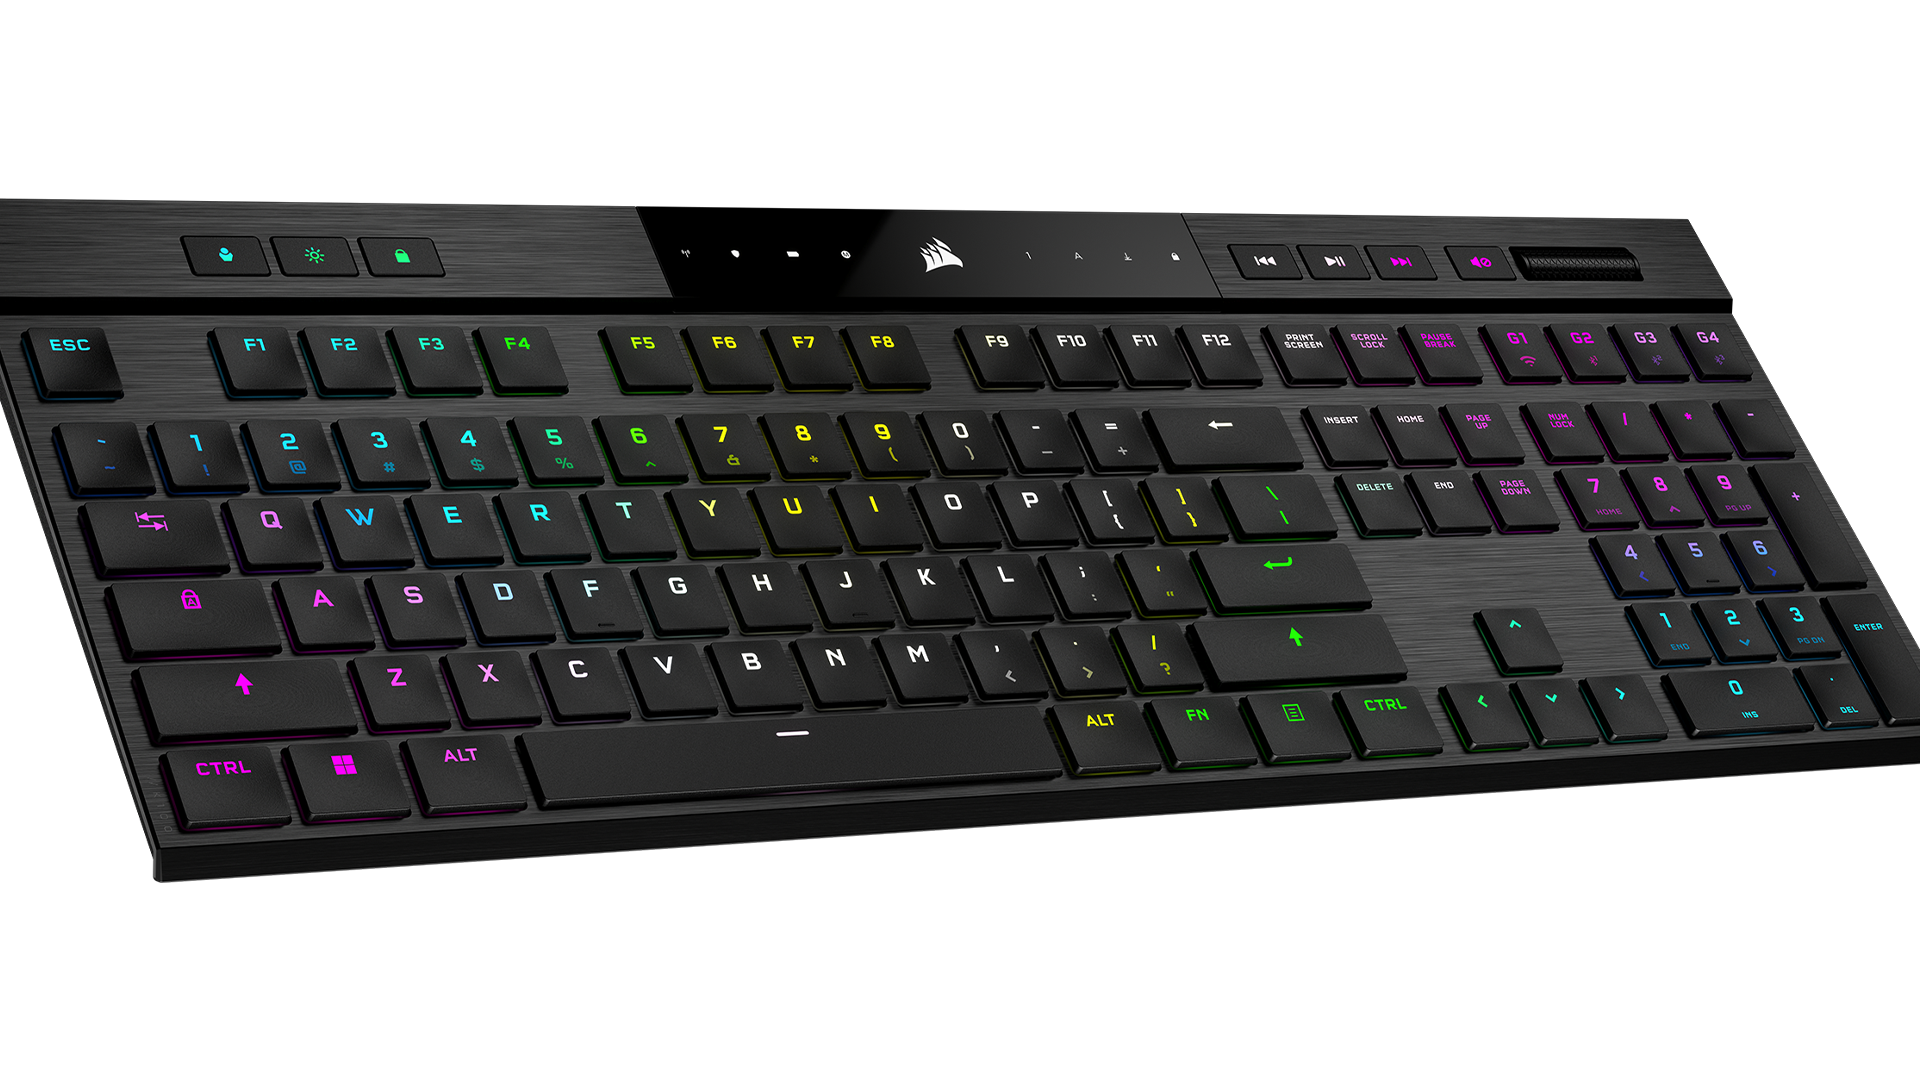 Corsair’s New Mechanical Keyboard Is Half an Inch Thick